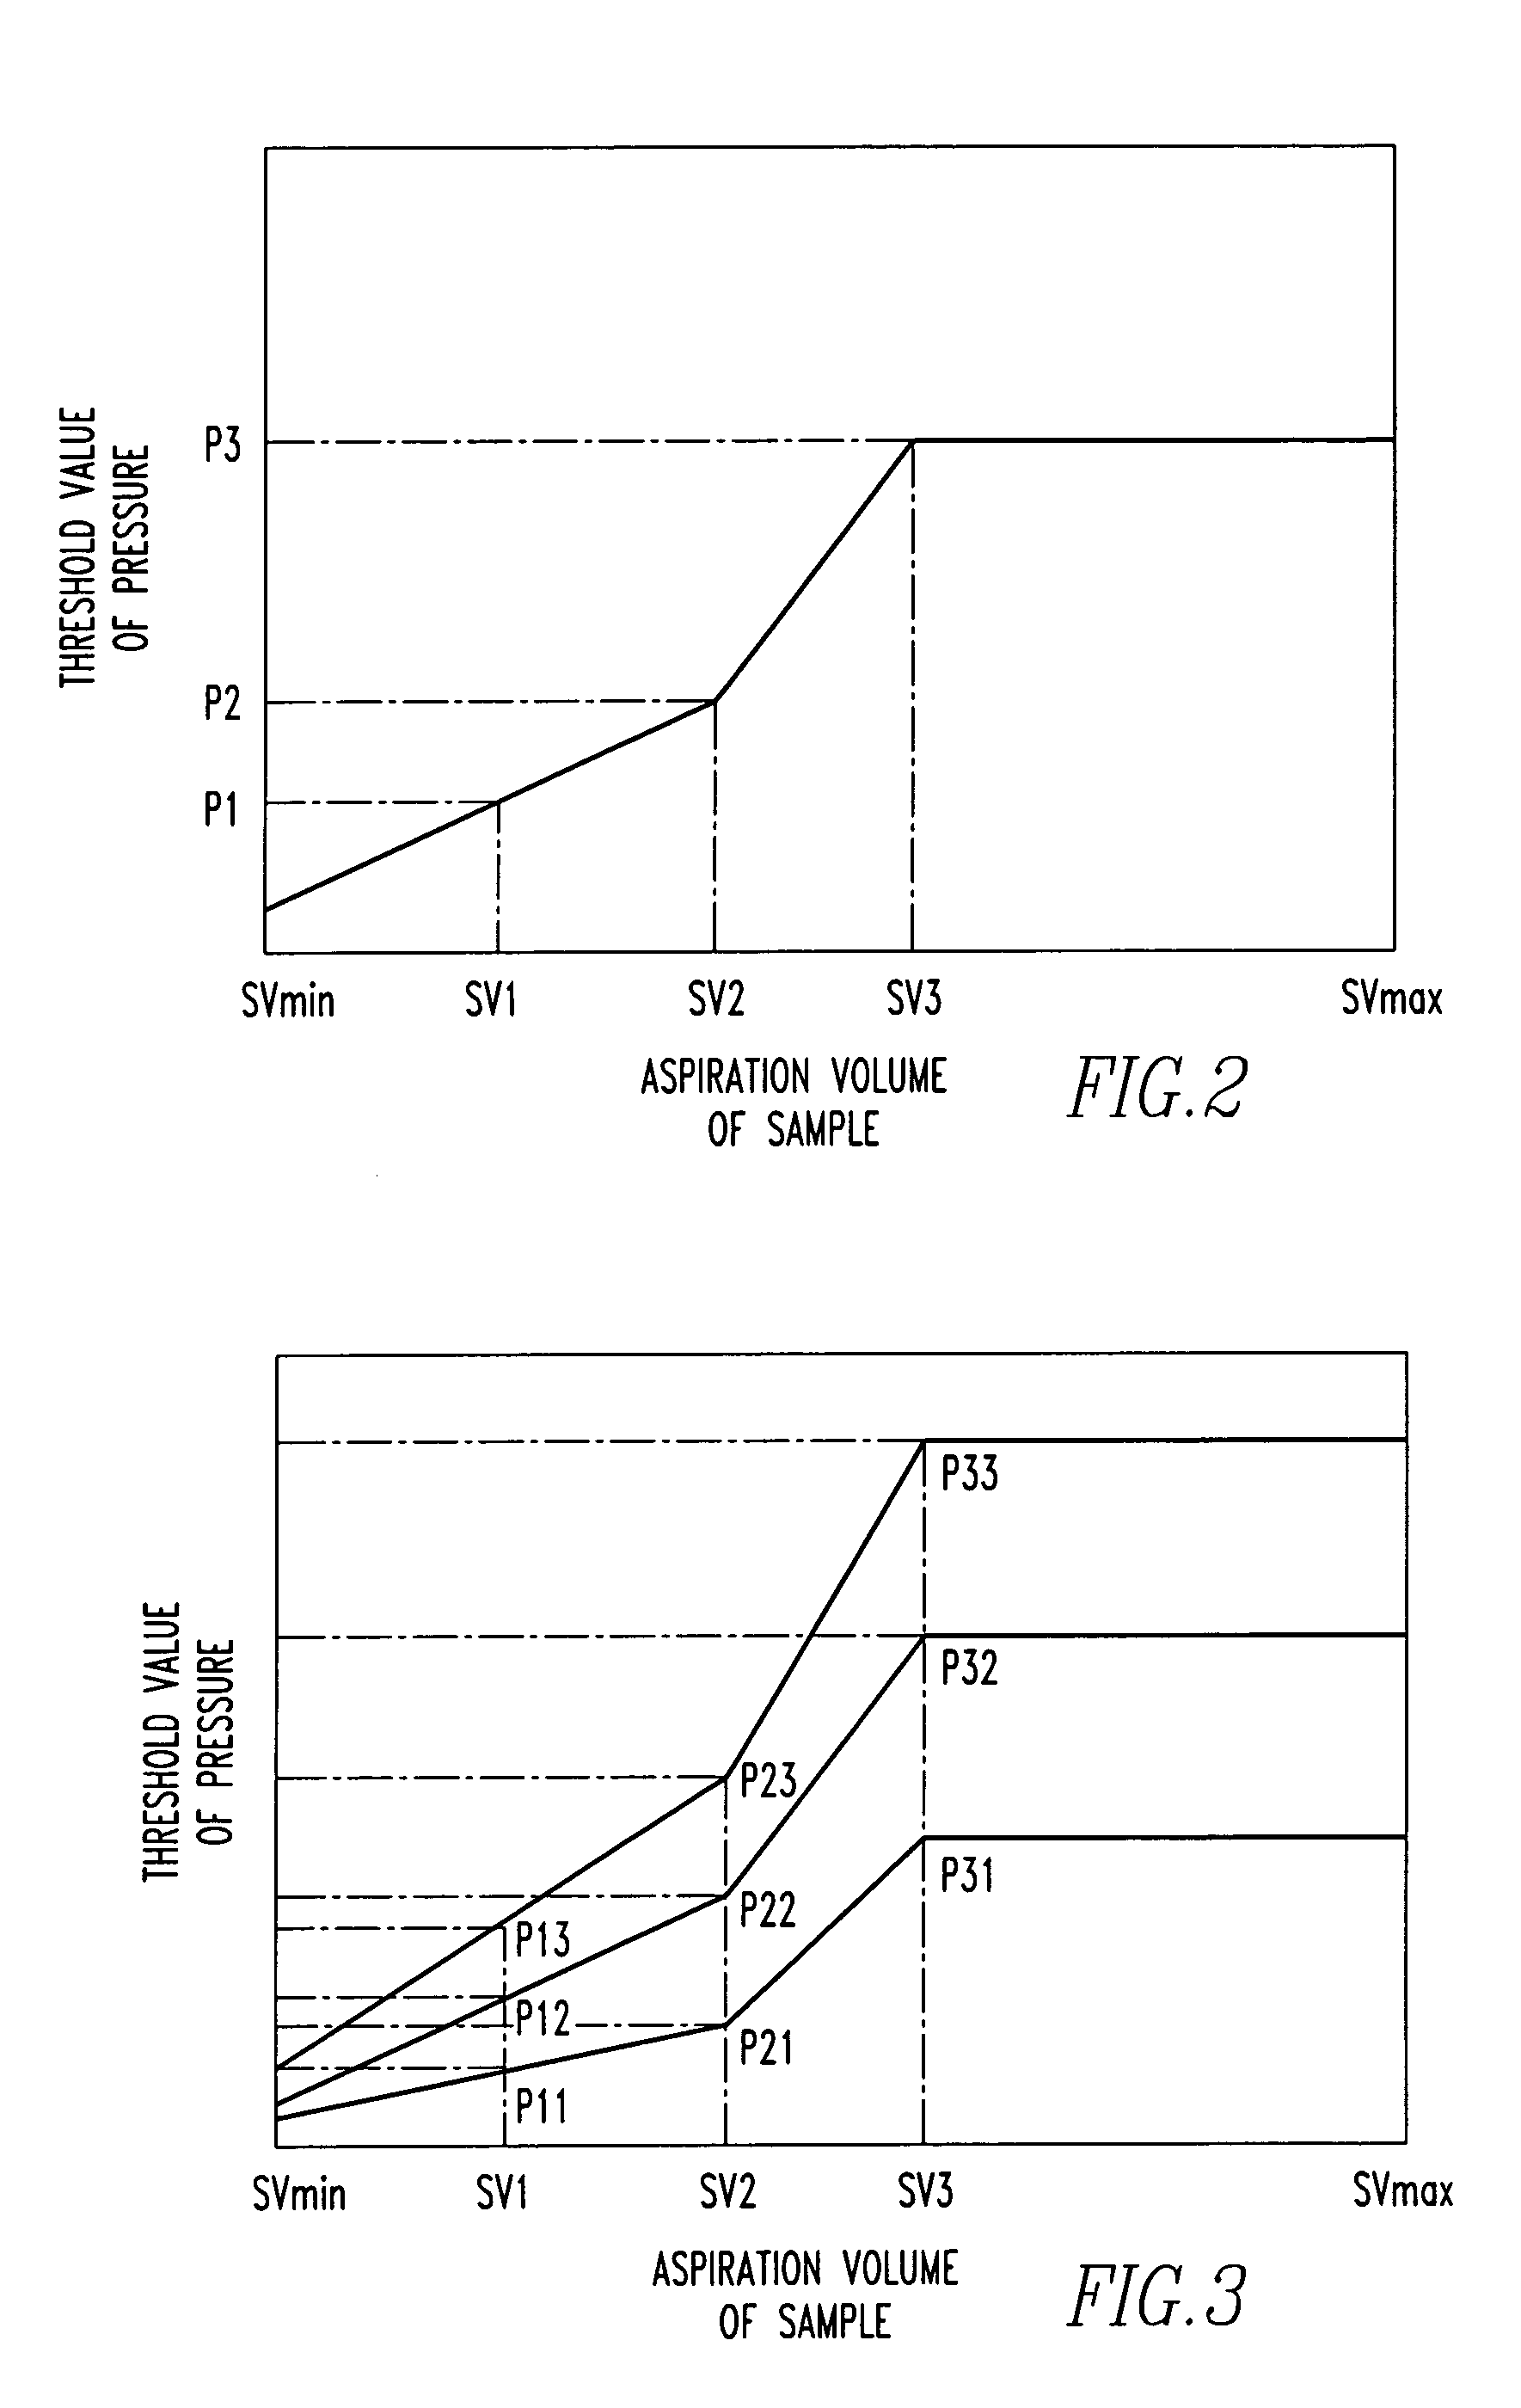 Method of detecting nozzle clogging and analytical instrument